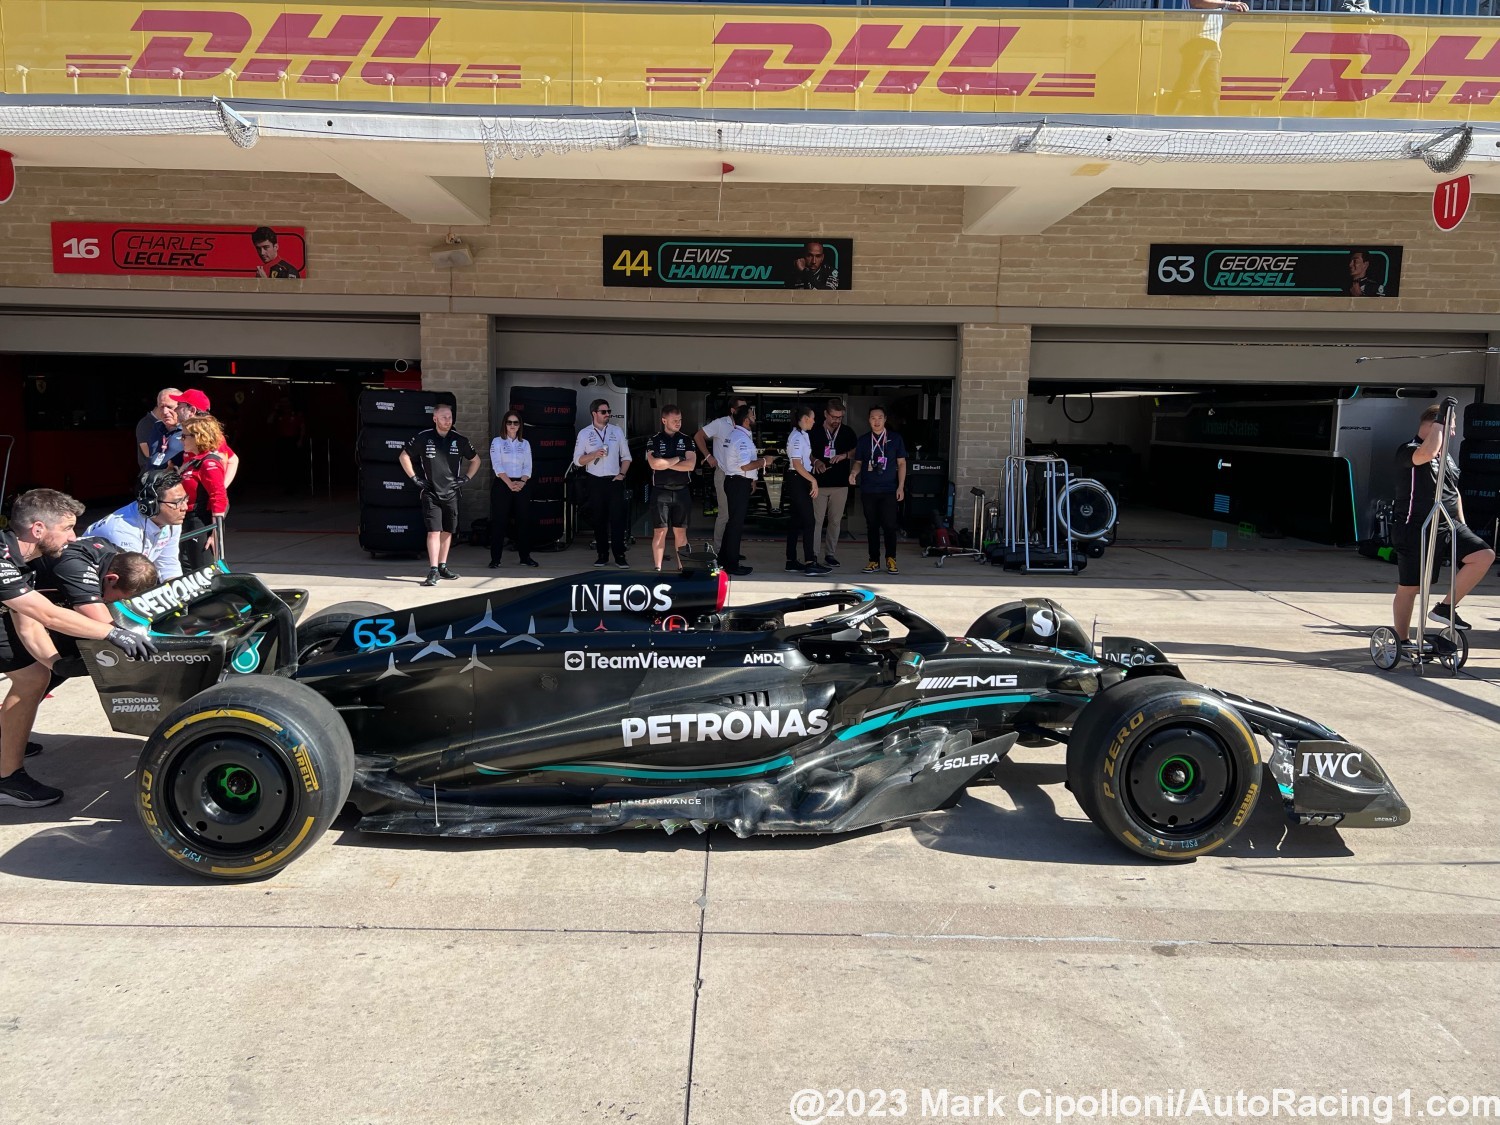 Mercedes has brought a big upgrade for the floor at COTA